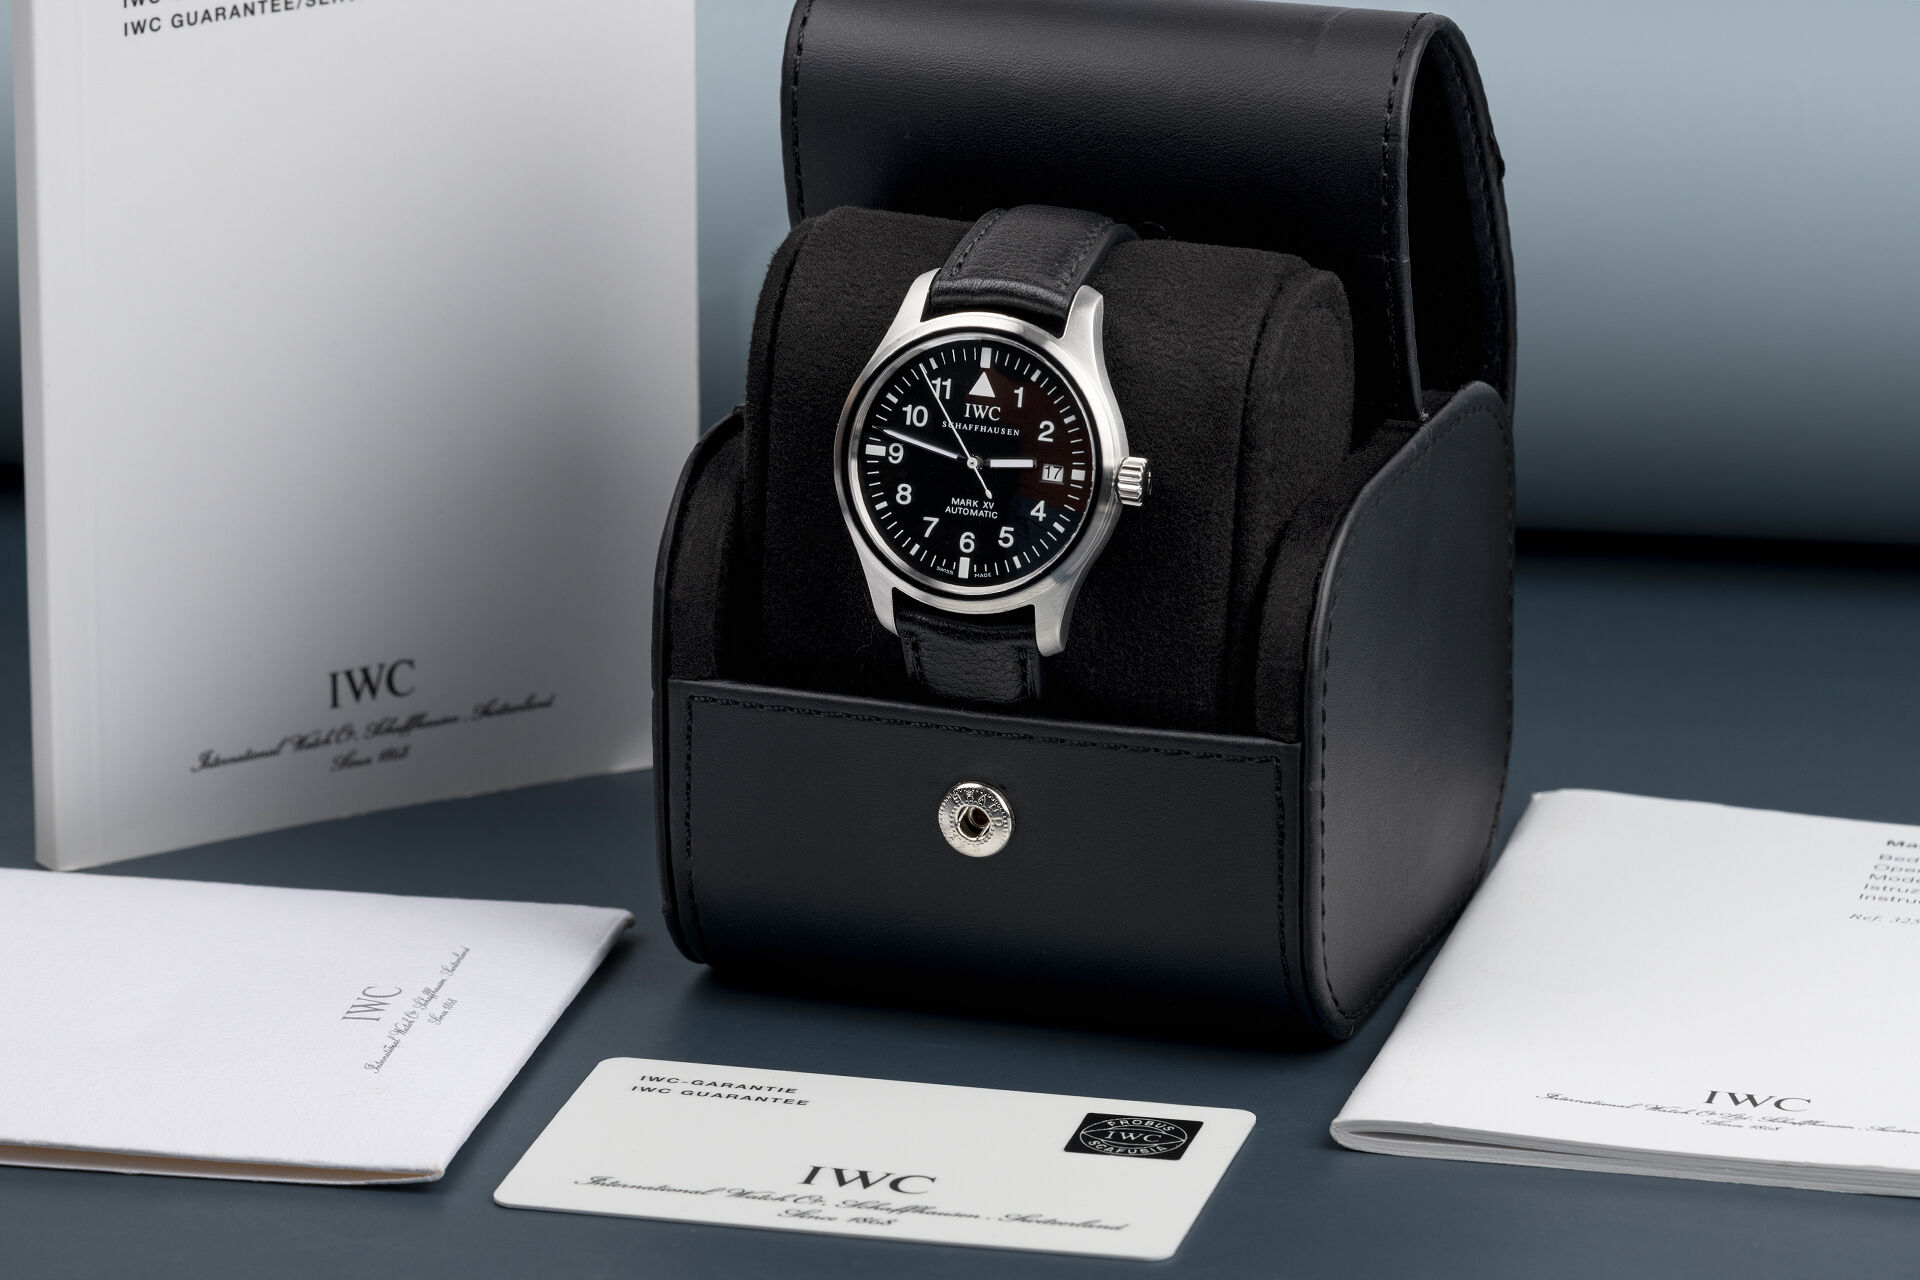 ref IW325301 | Box & Papers | IWC Mark XV